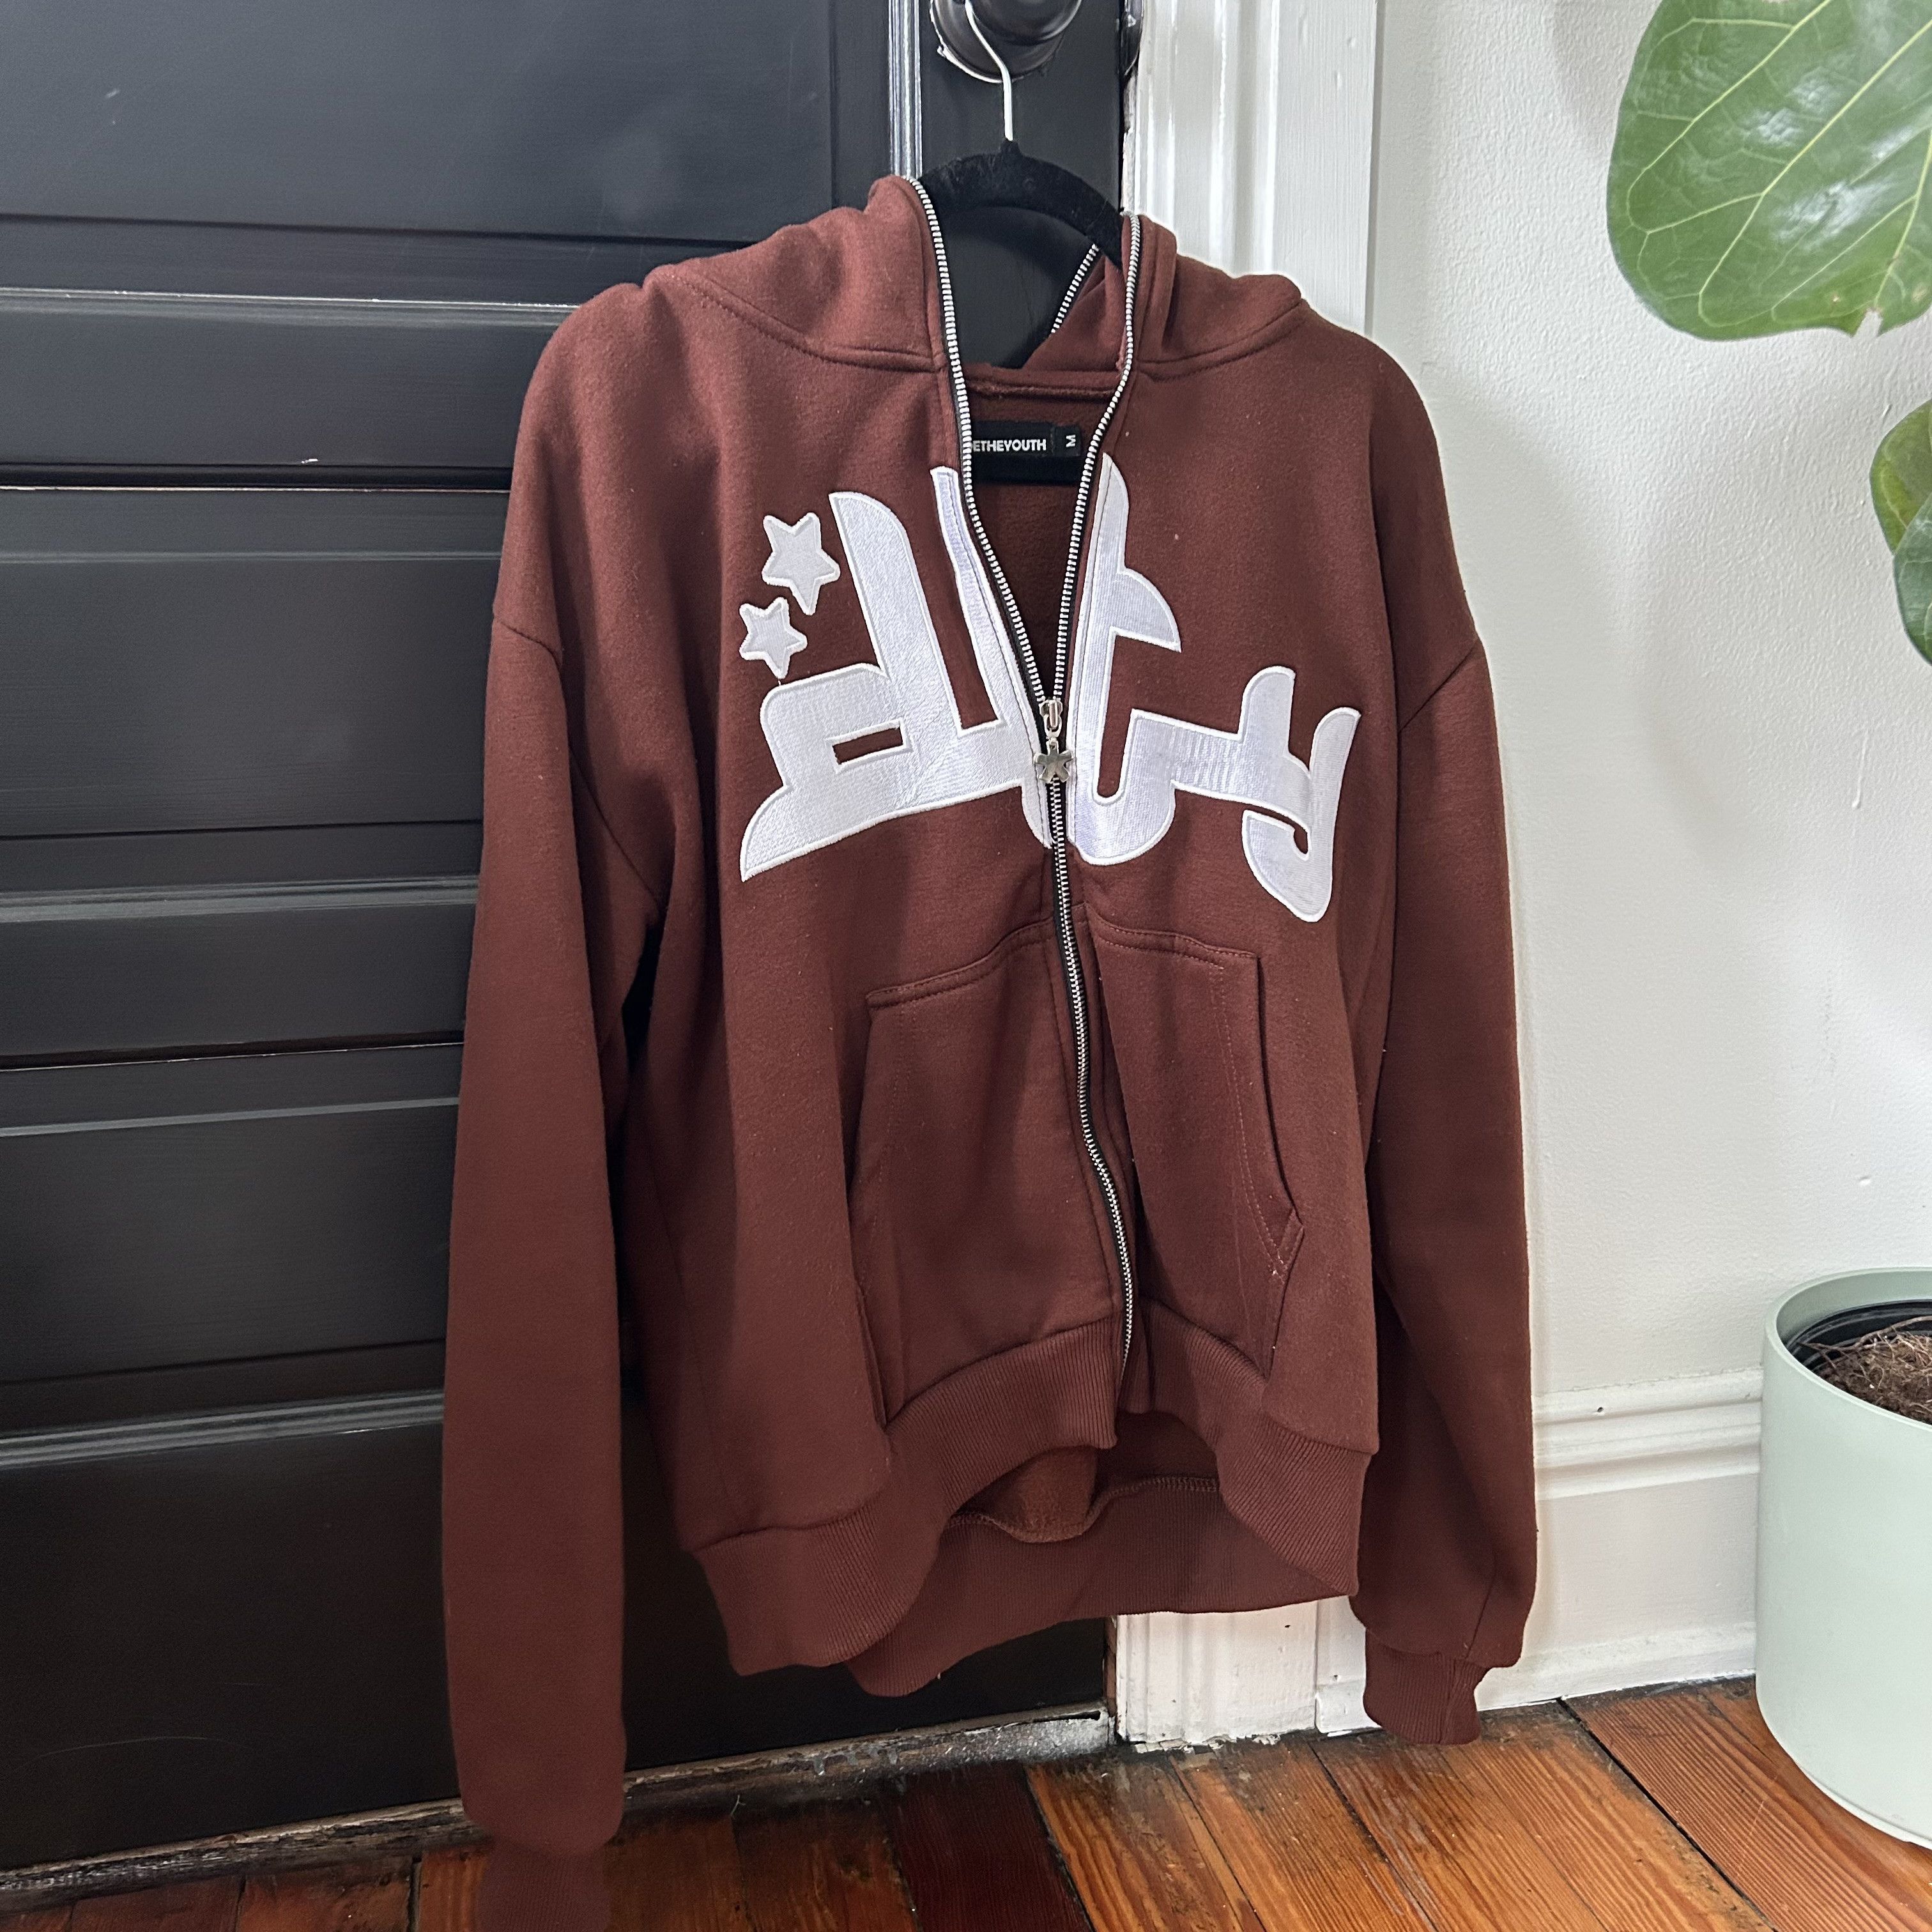 Divide The Youth Divide the Youth - Brown full zip hoodie - Size M ...